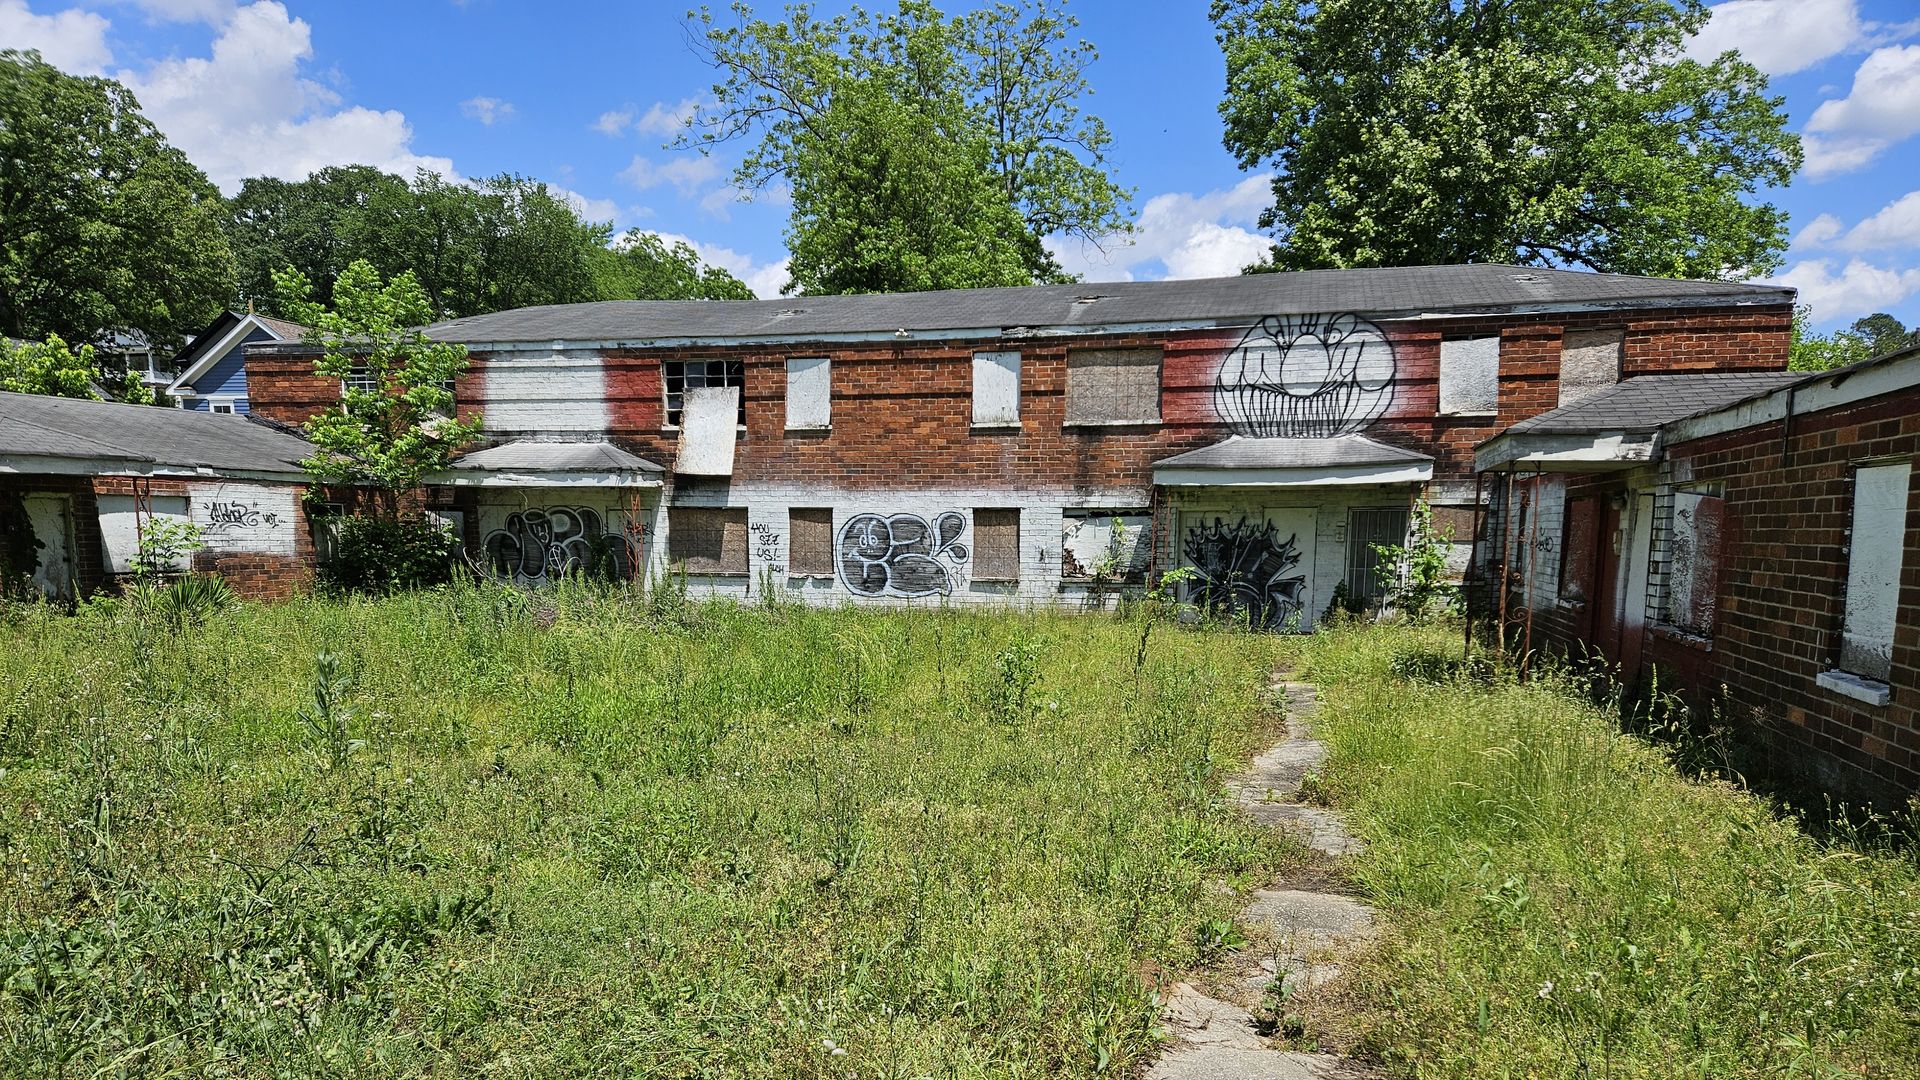 A vacant and dilapidated building that will be transformed into affordable housing.